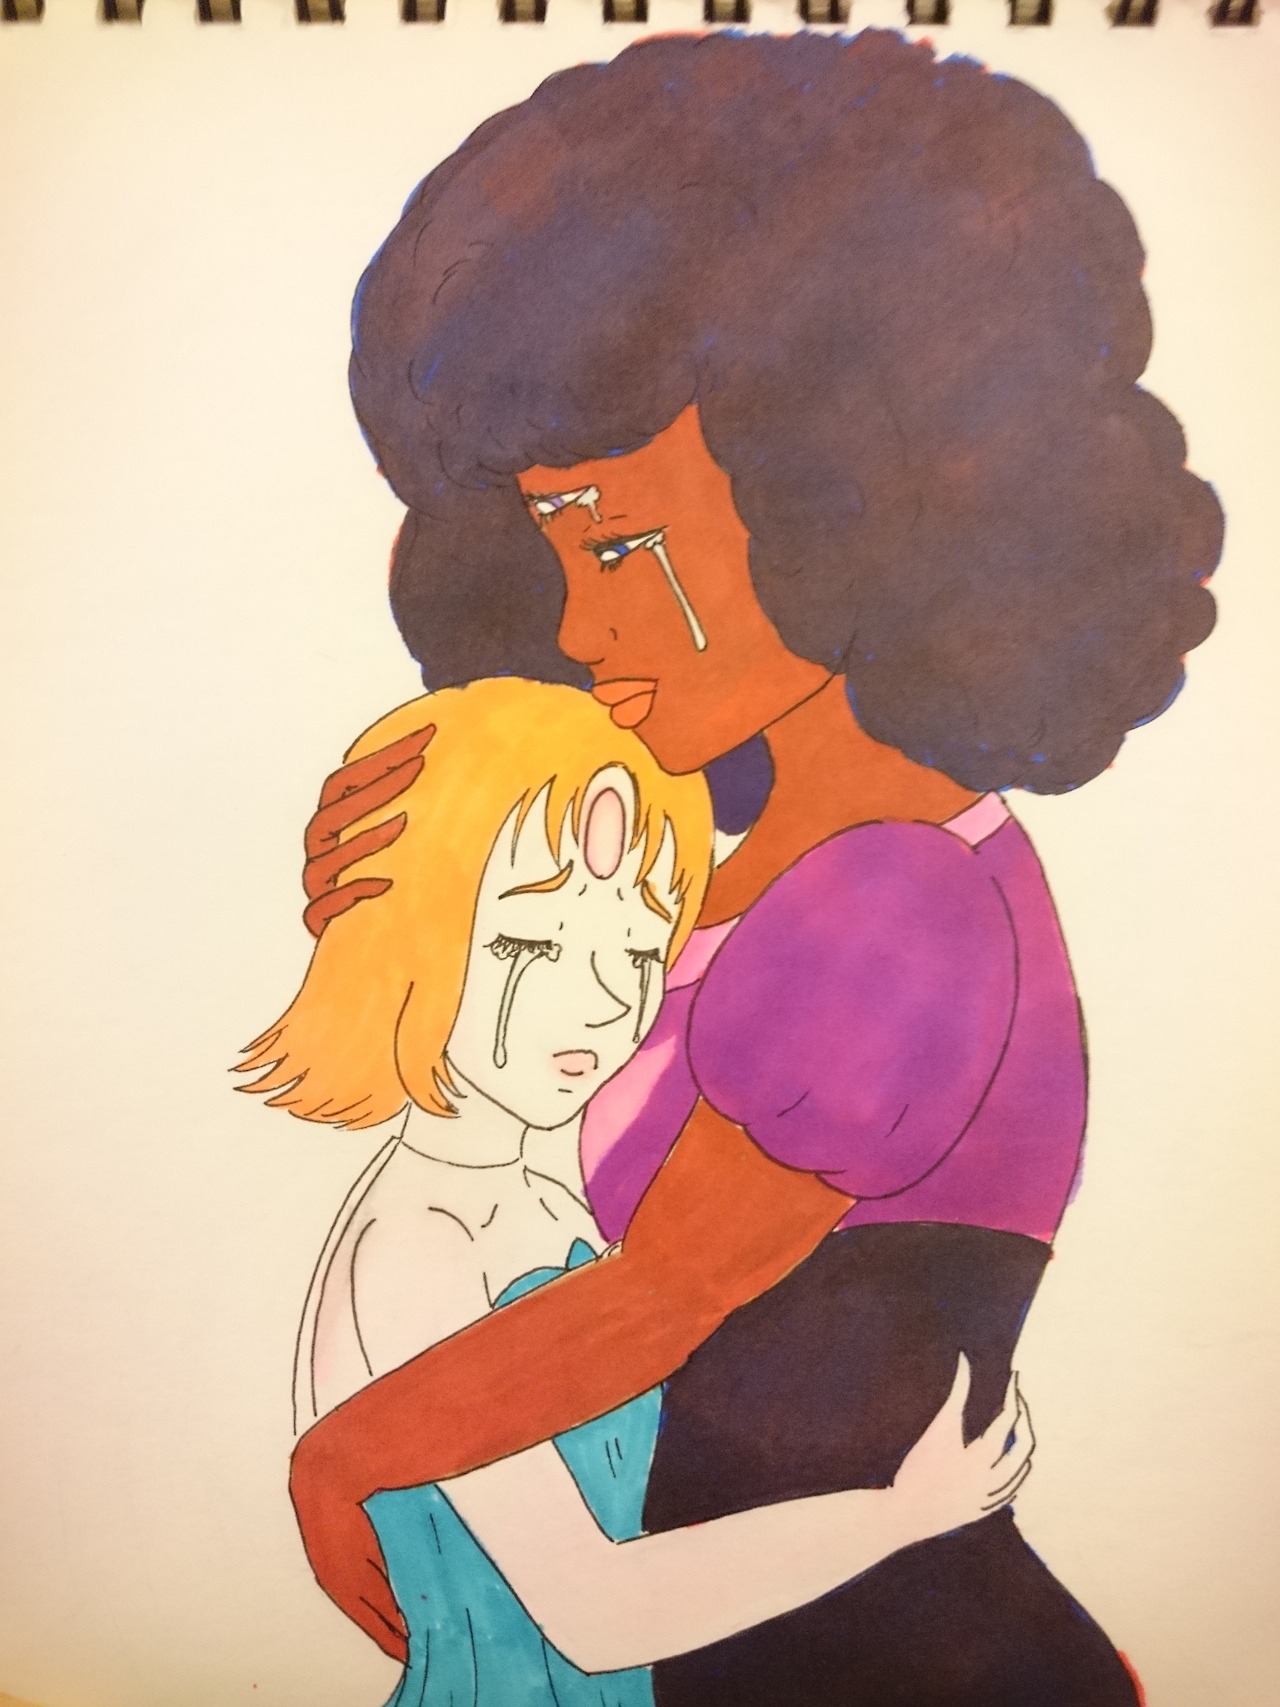 Hug Inktober day 3 I think that Pearl would have run to Garnet once Rose had given up her form or whatever